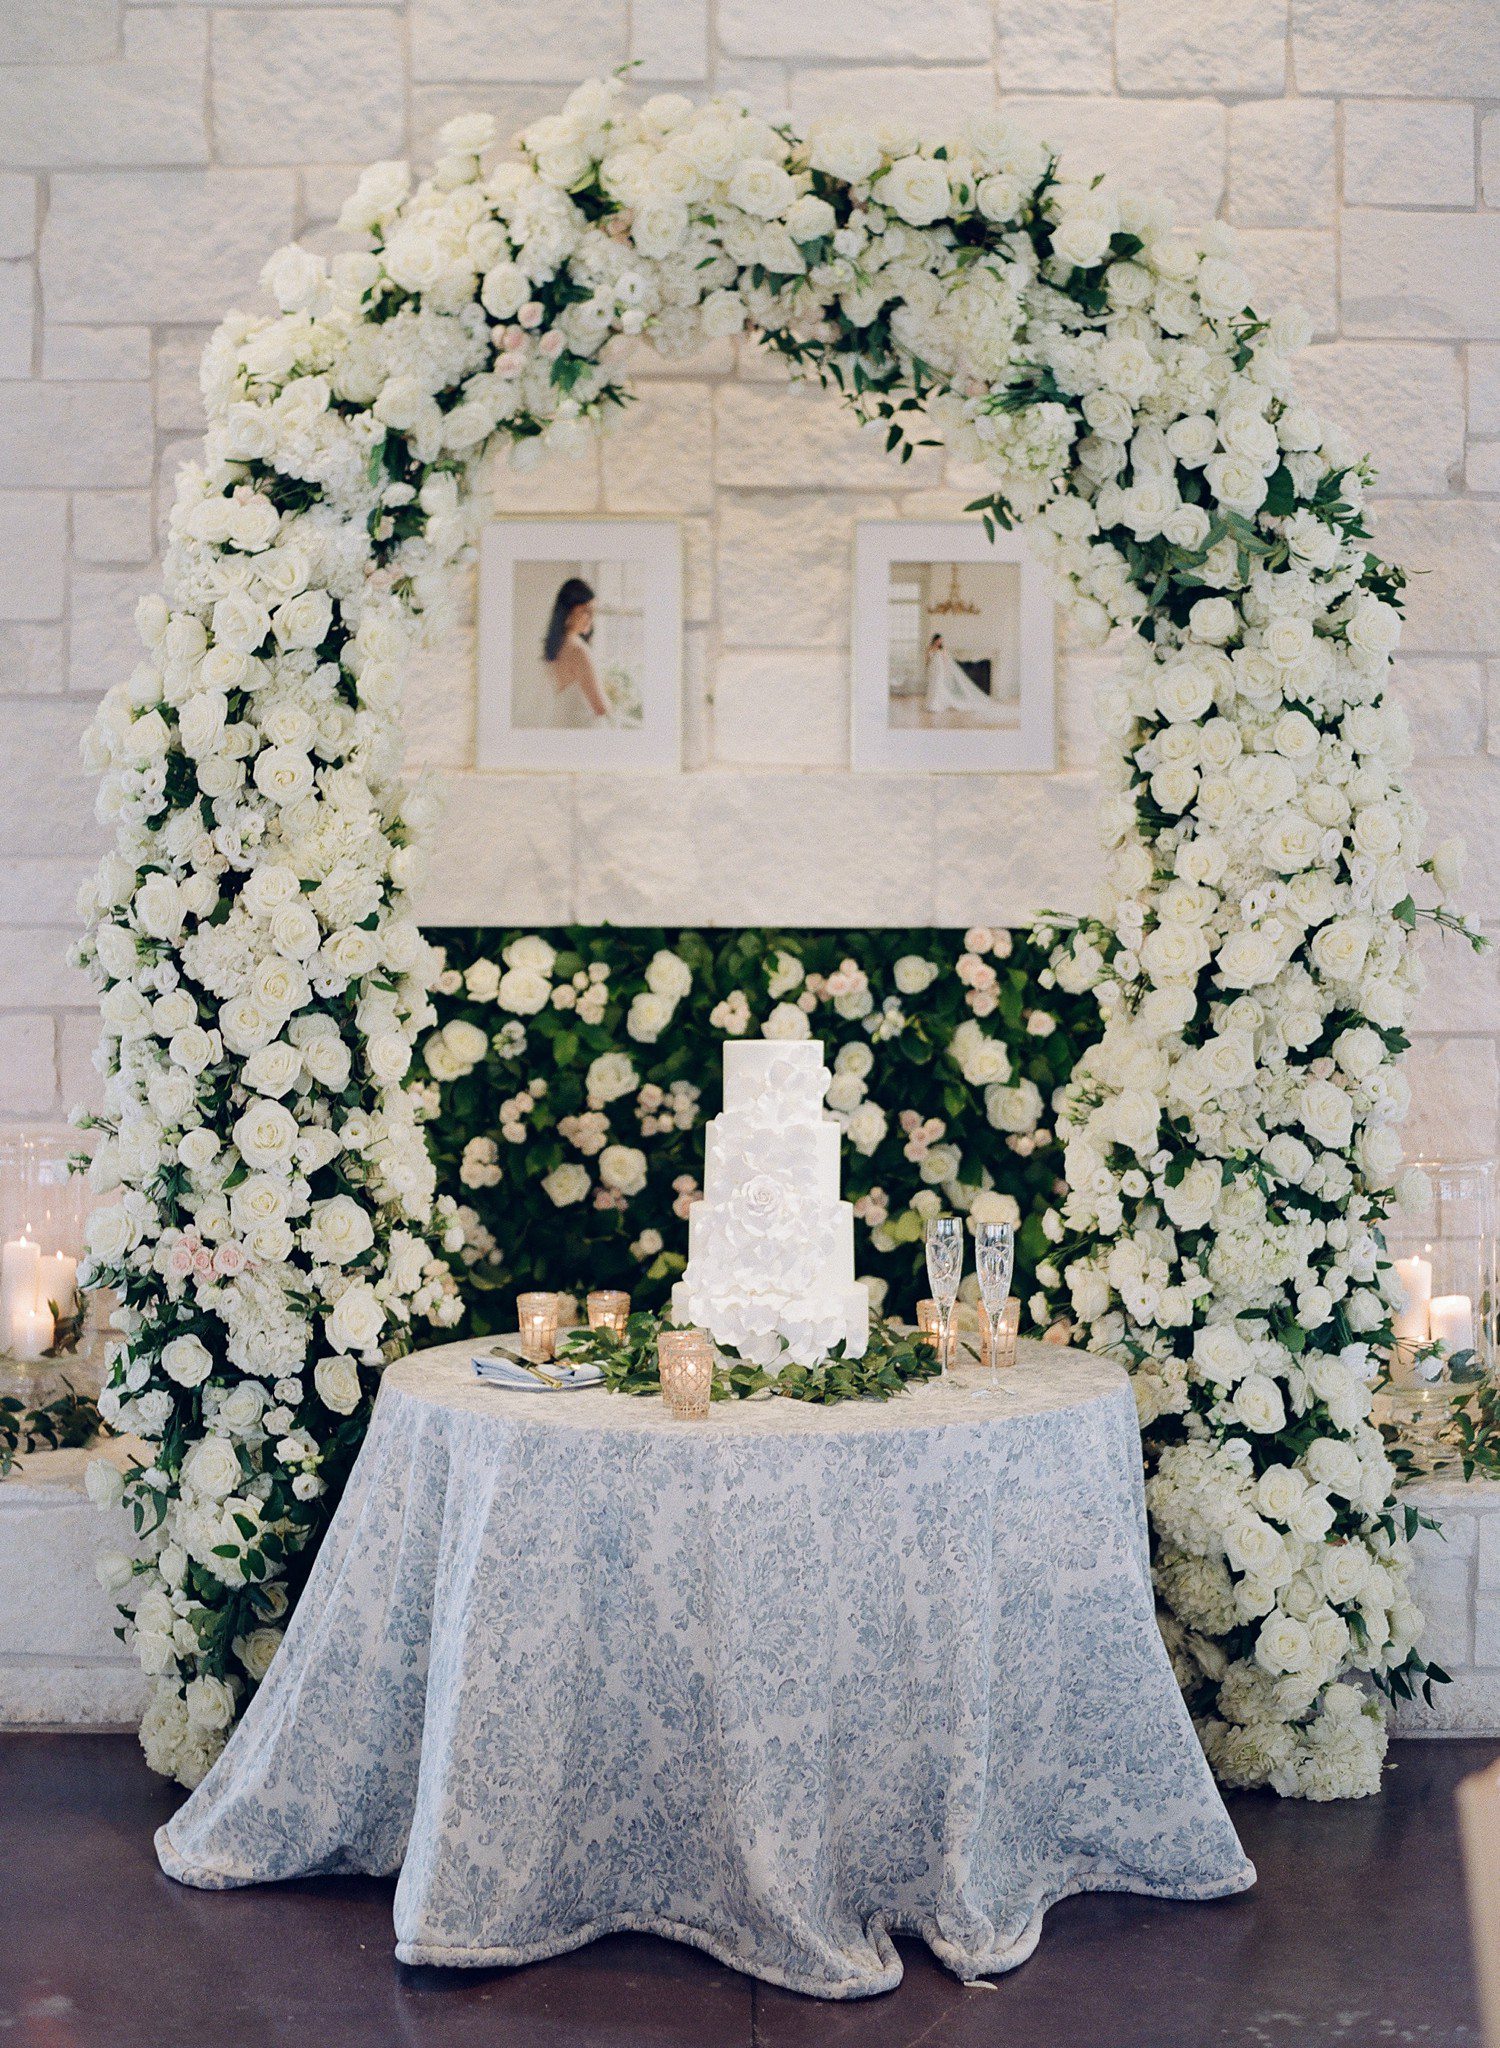 Wedding Cake Table with white flowers